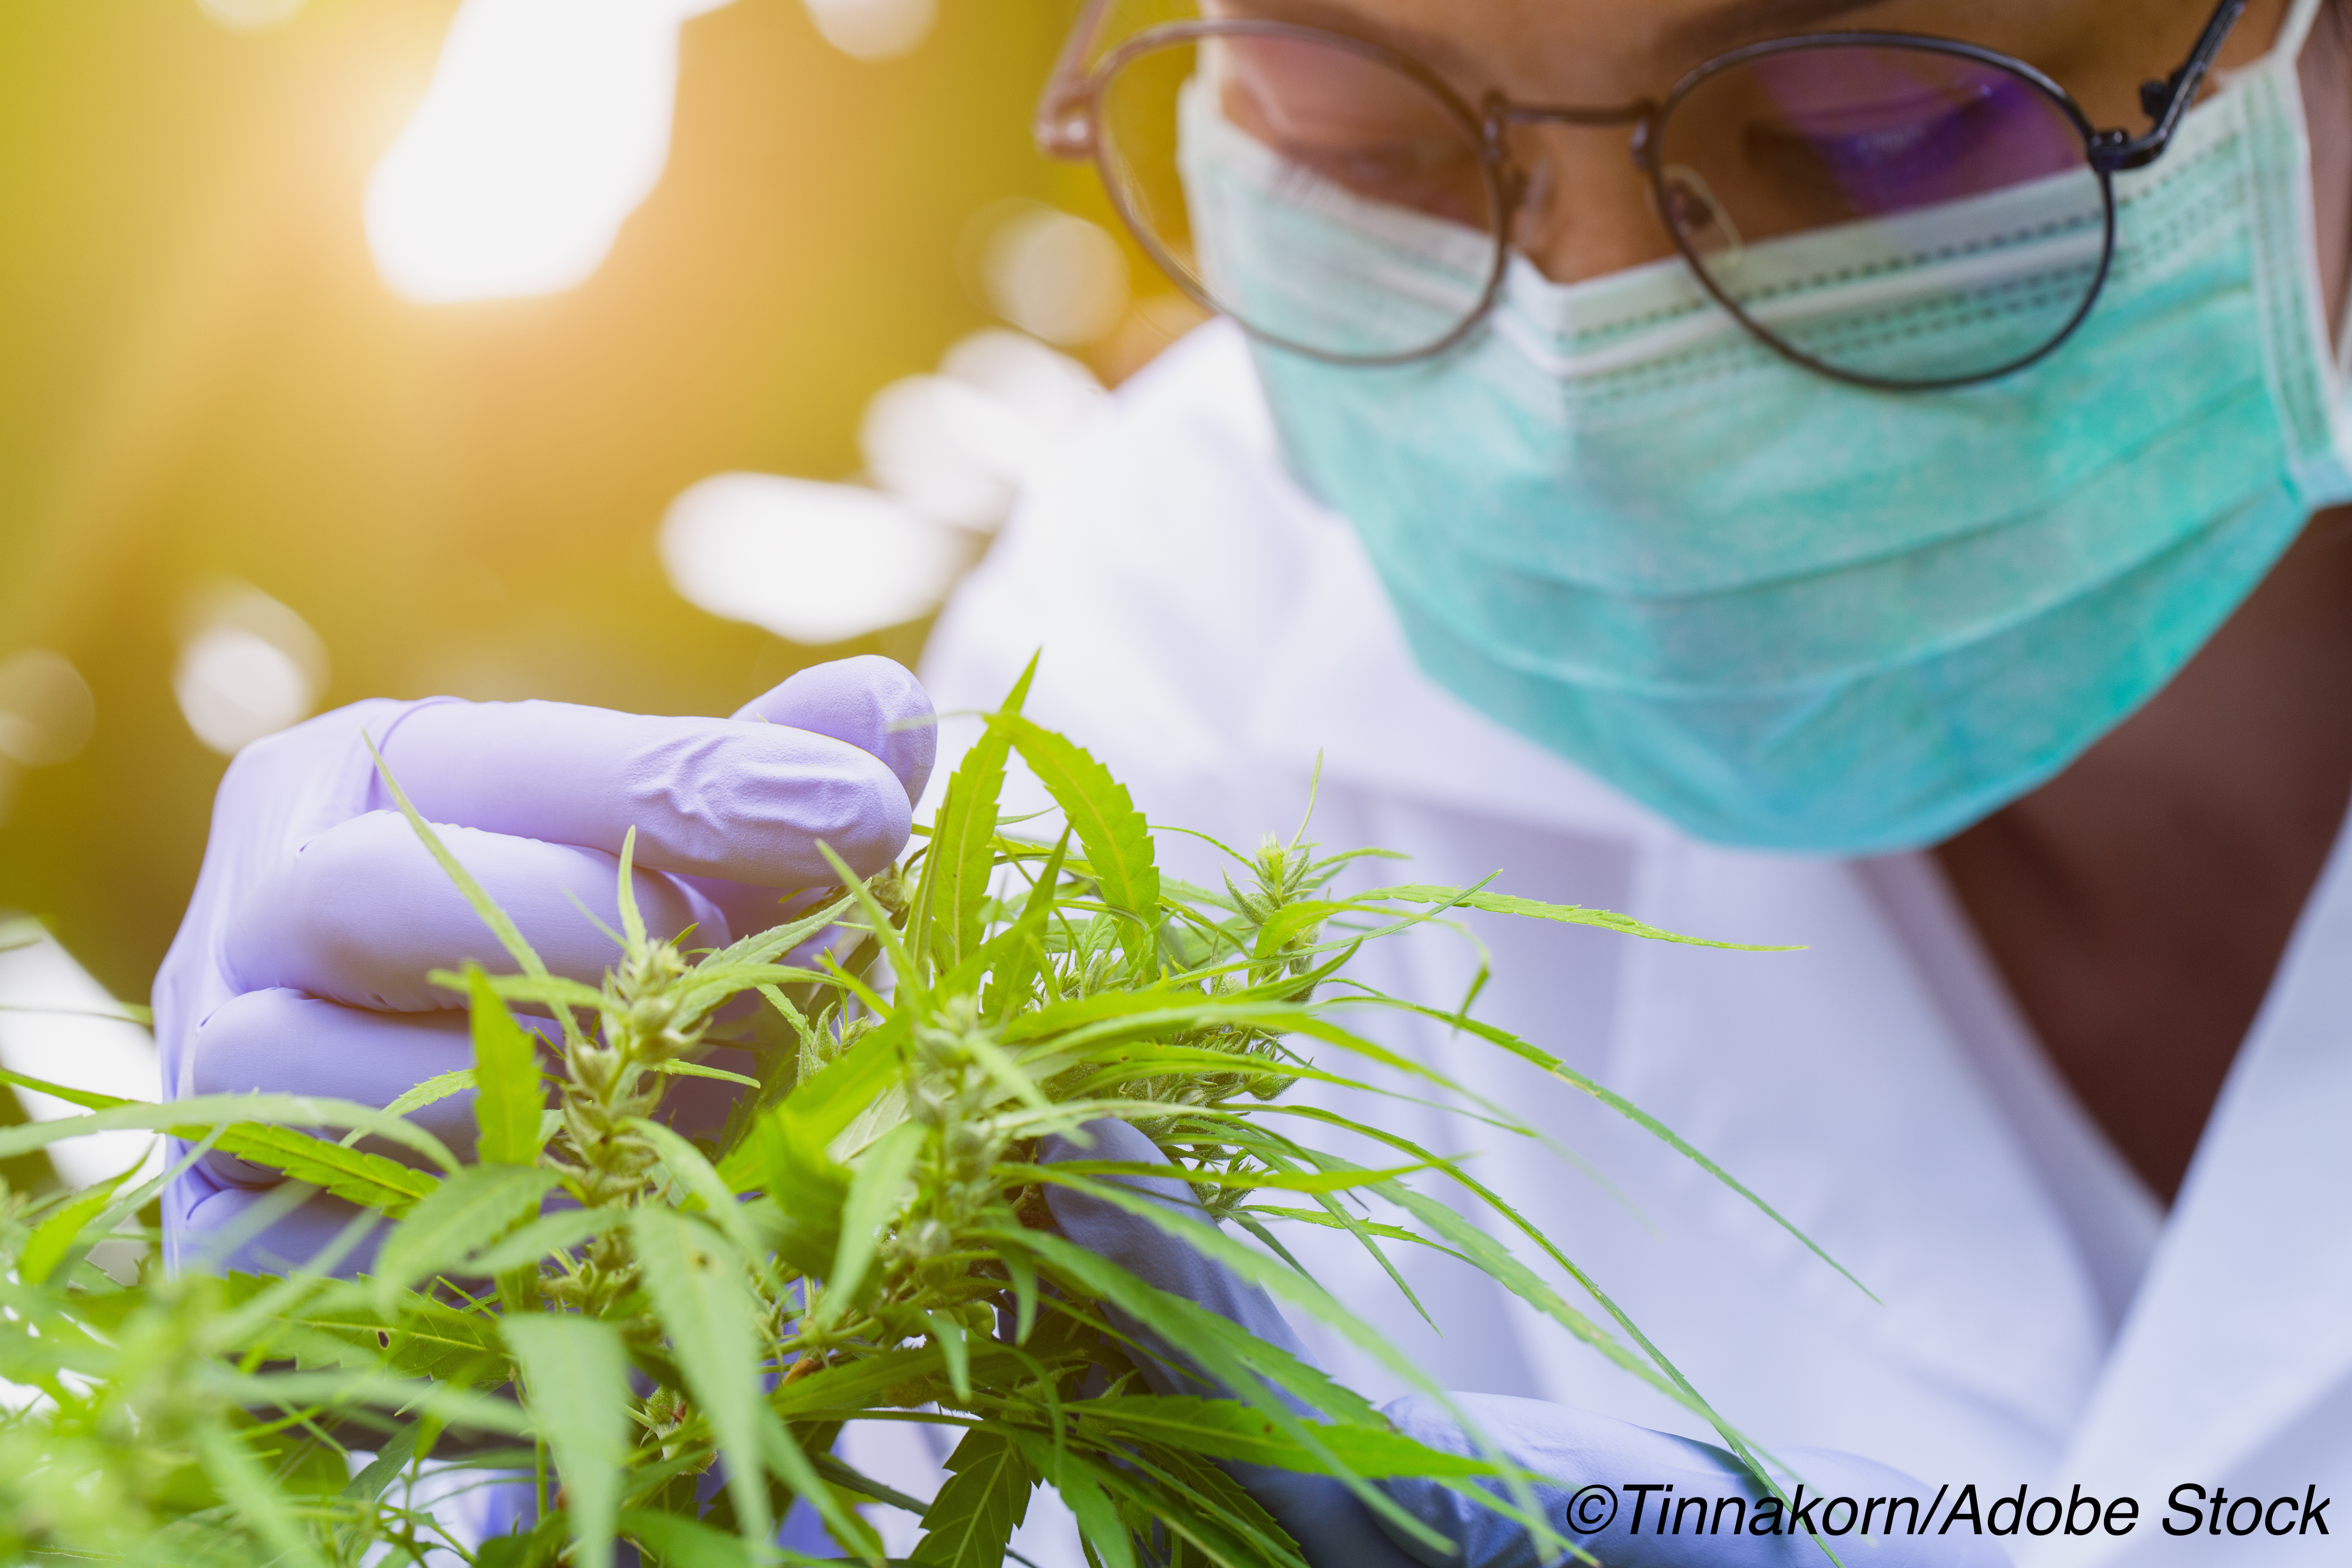 FDA Releases Draft Guidance for Cannabis-Derived Drug Research